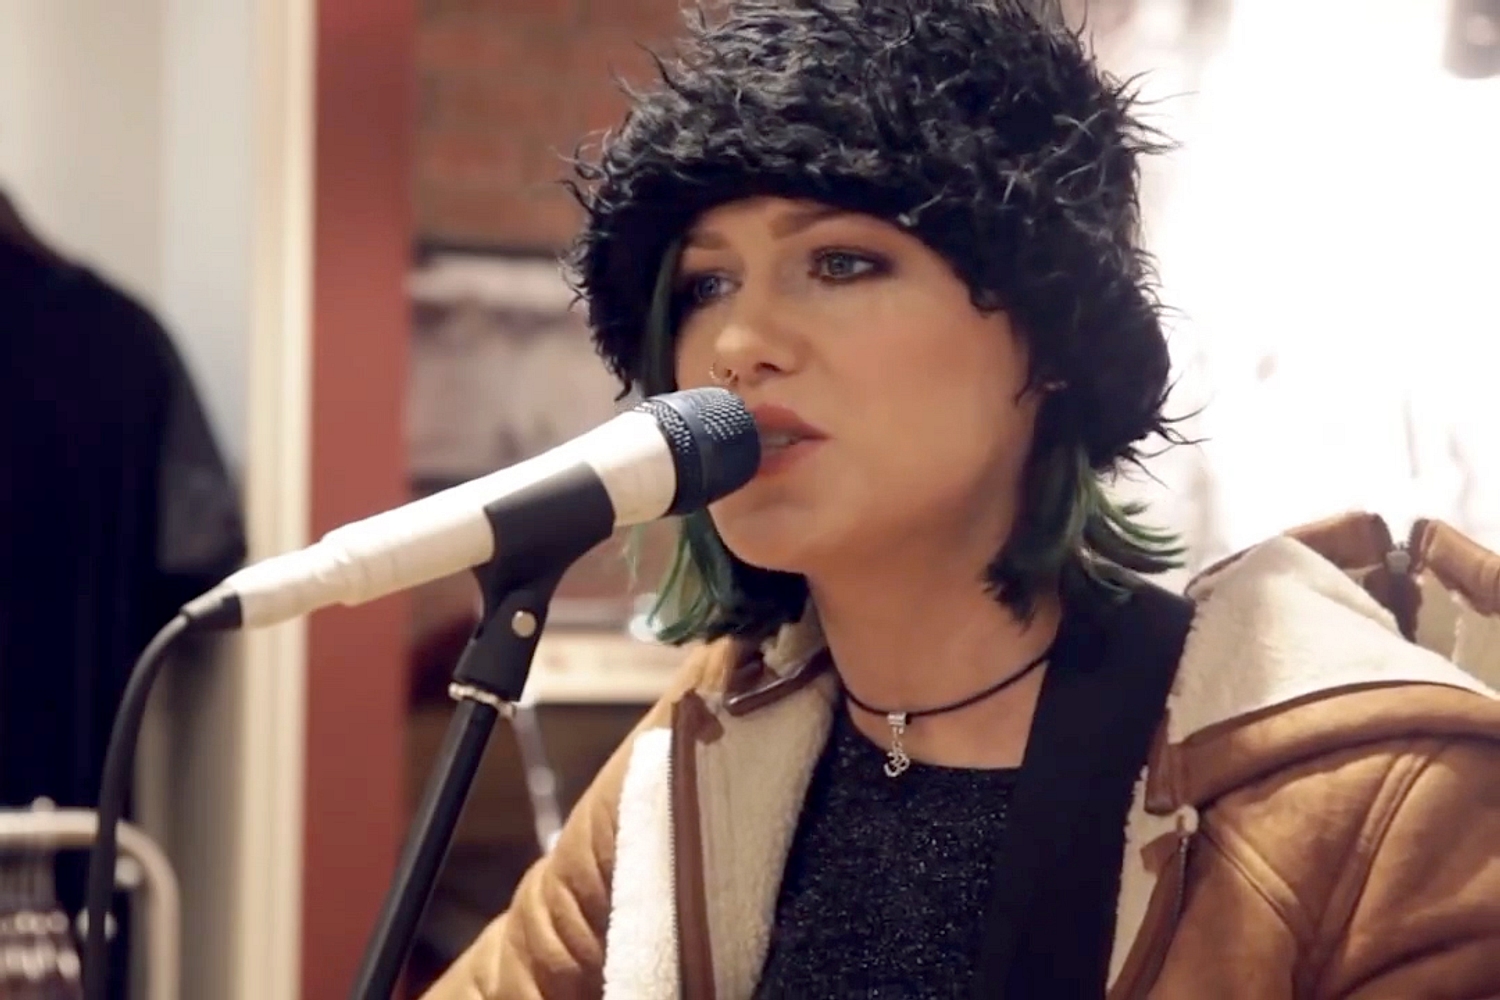 Watch Tonight Alive perform ‘Amelia’ in store at Dr. Martens Newcastle